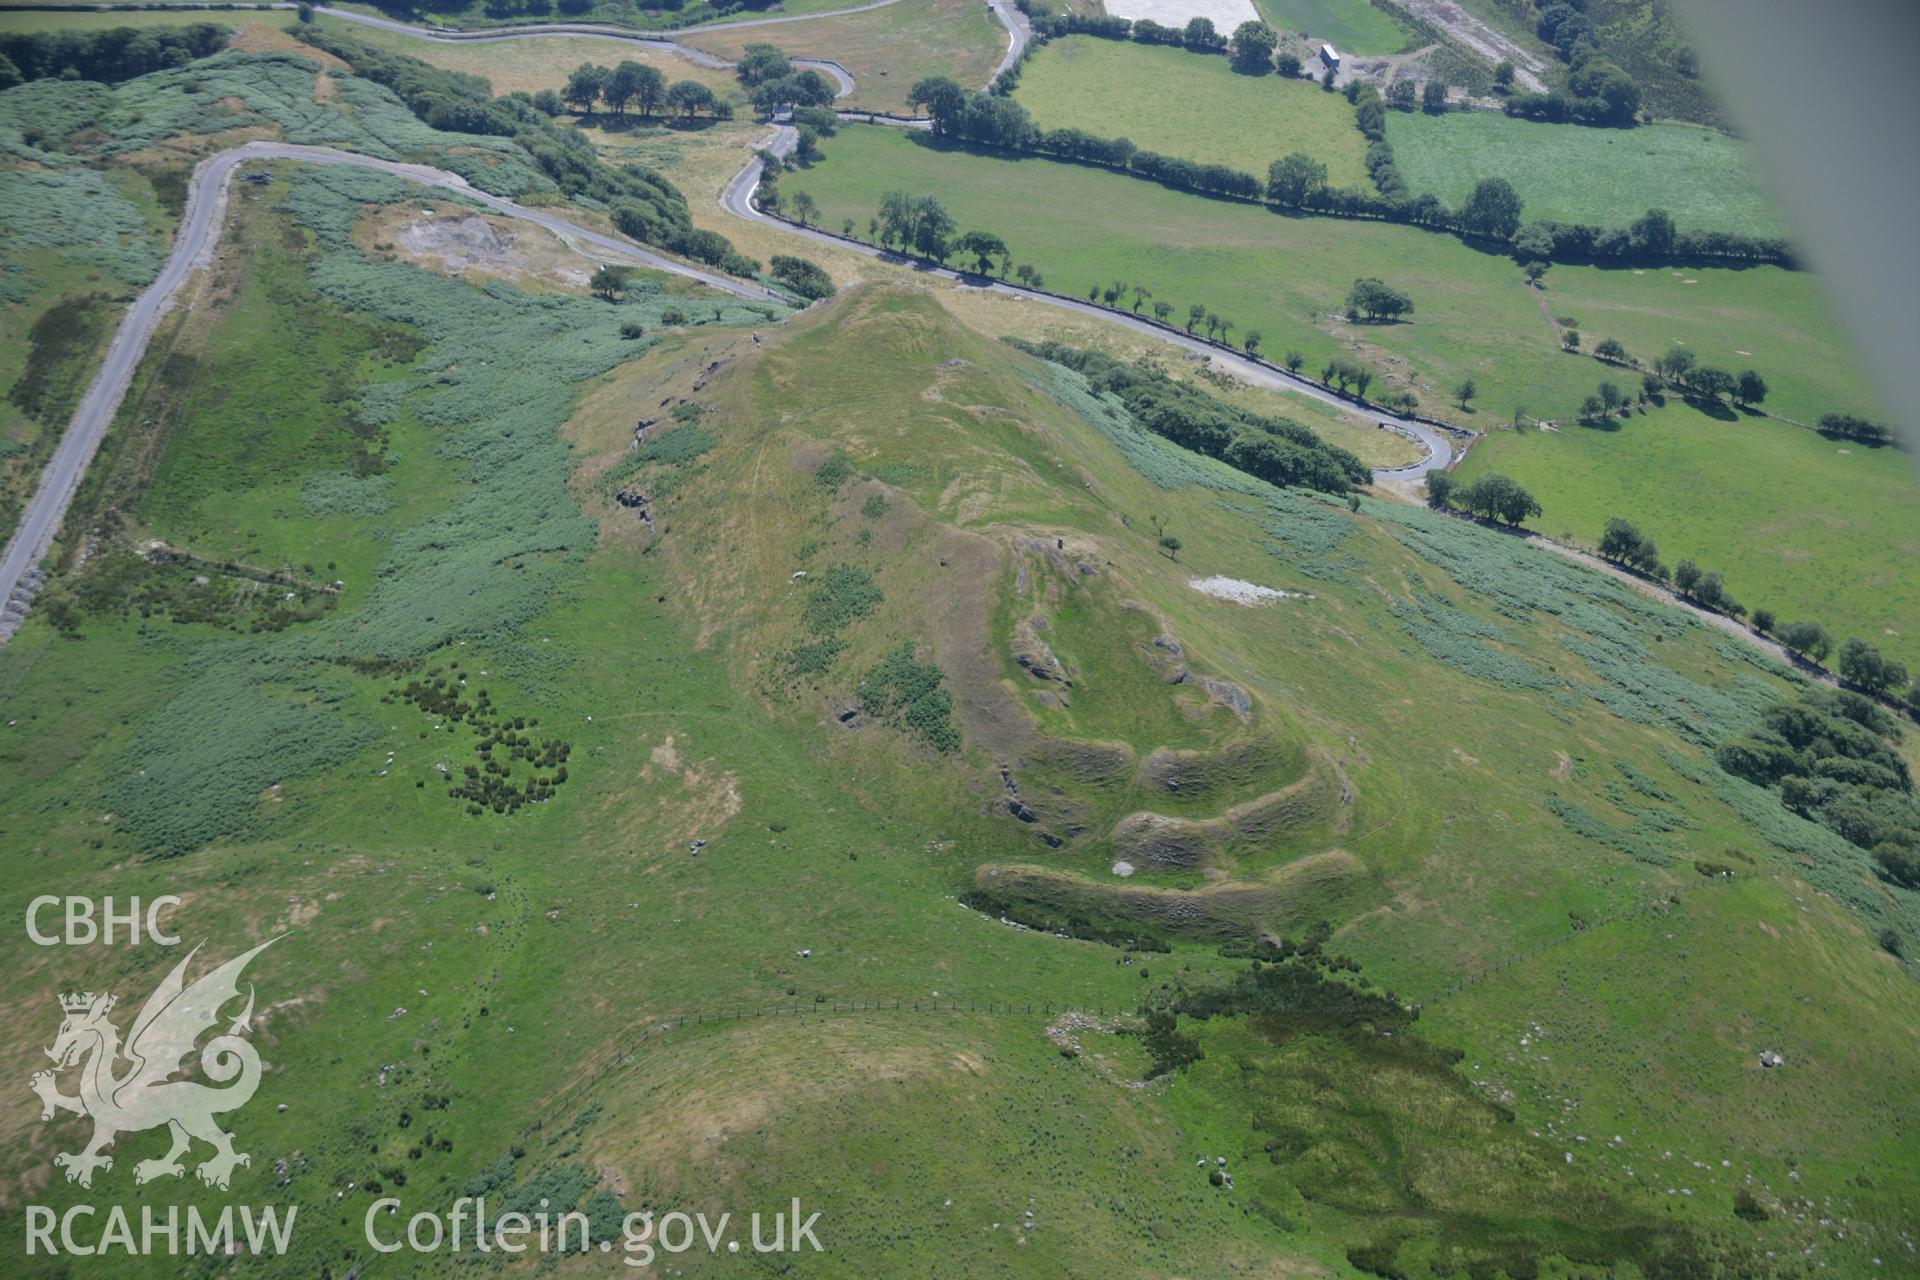 RCAHMW colour oblique aerial photograph of Pen-y-Bannau Hillfort. Taken on 17 July 2006 by Toby Driver.